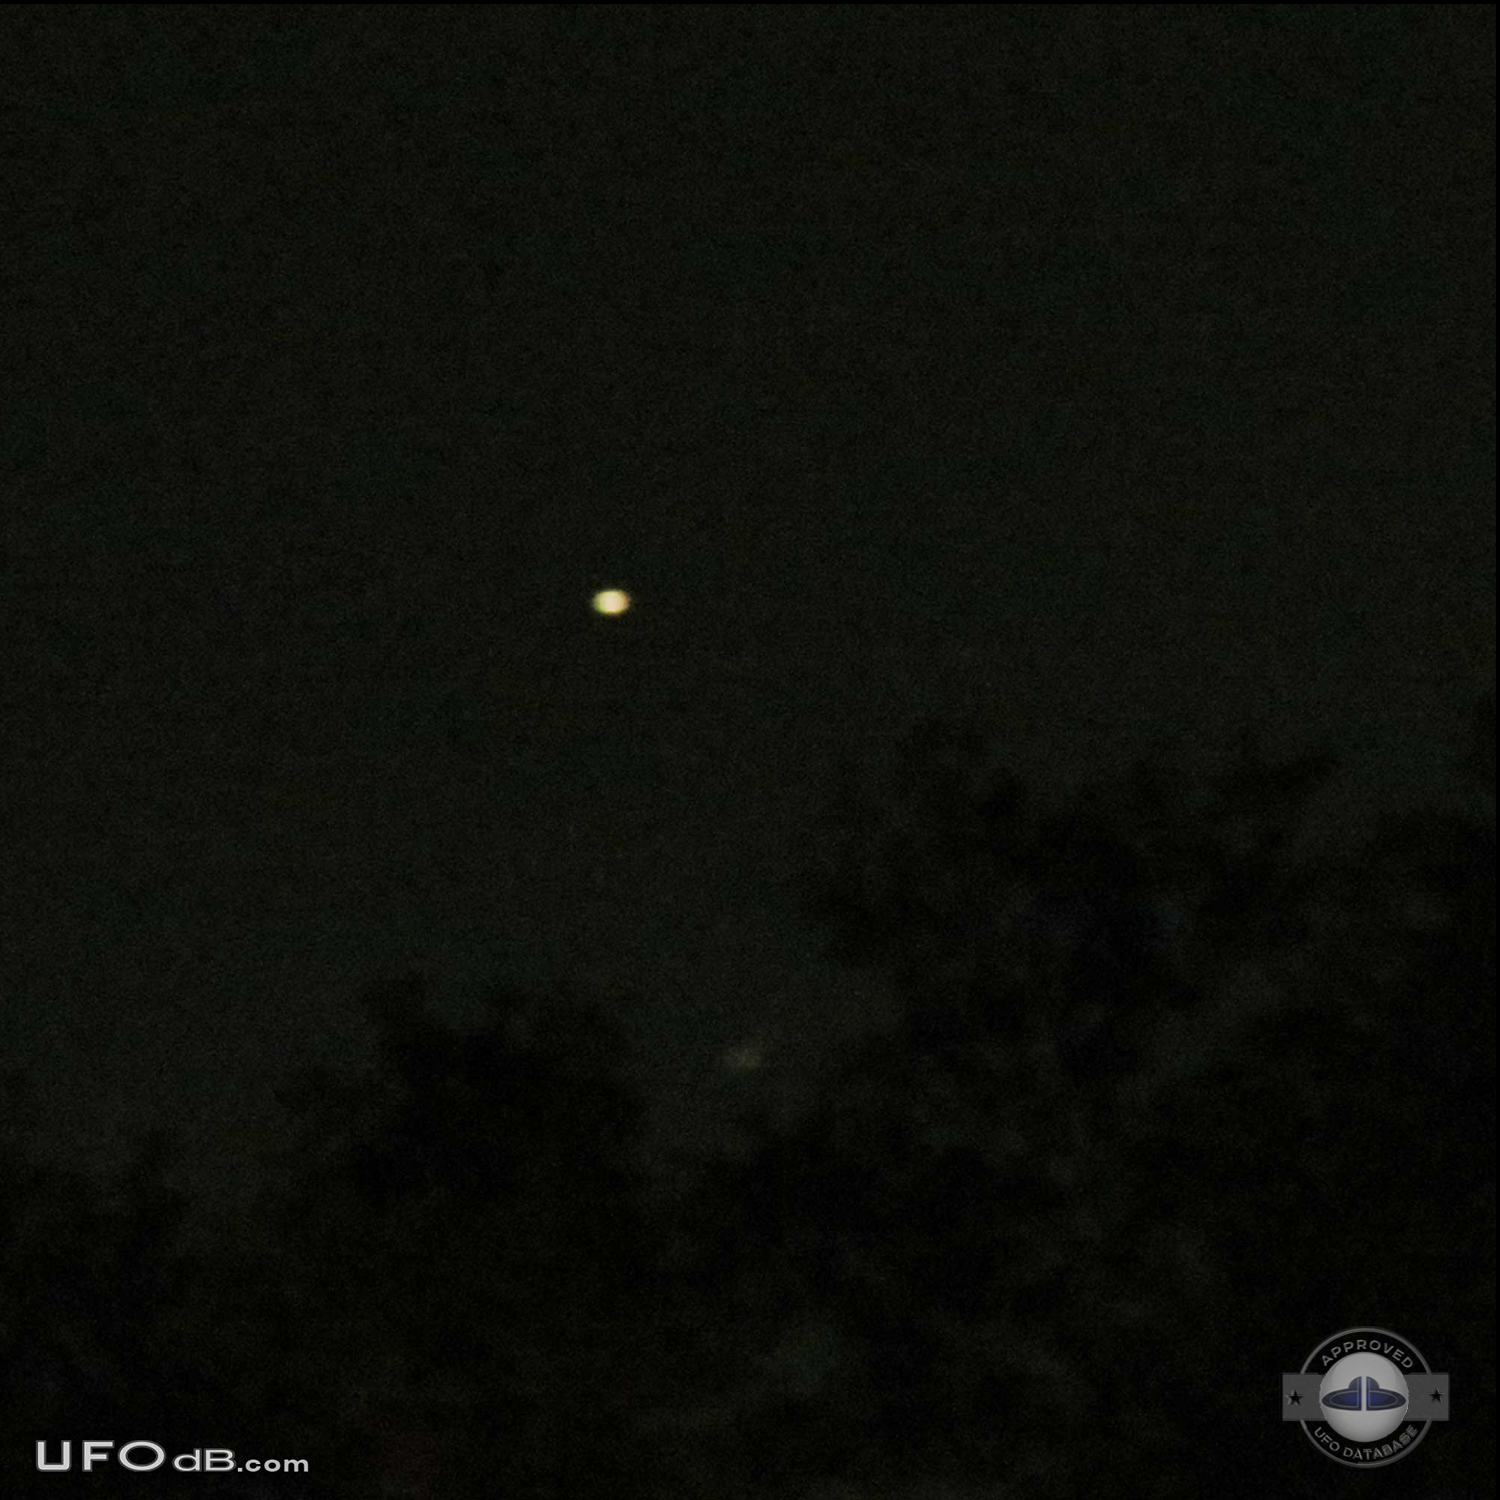 UFO sightings seen by neighbors and Local Police in Texas USA 2012 UFO Picture #479-1